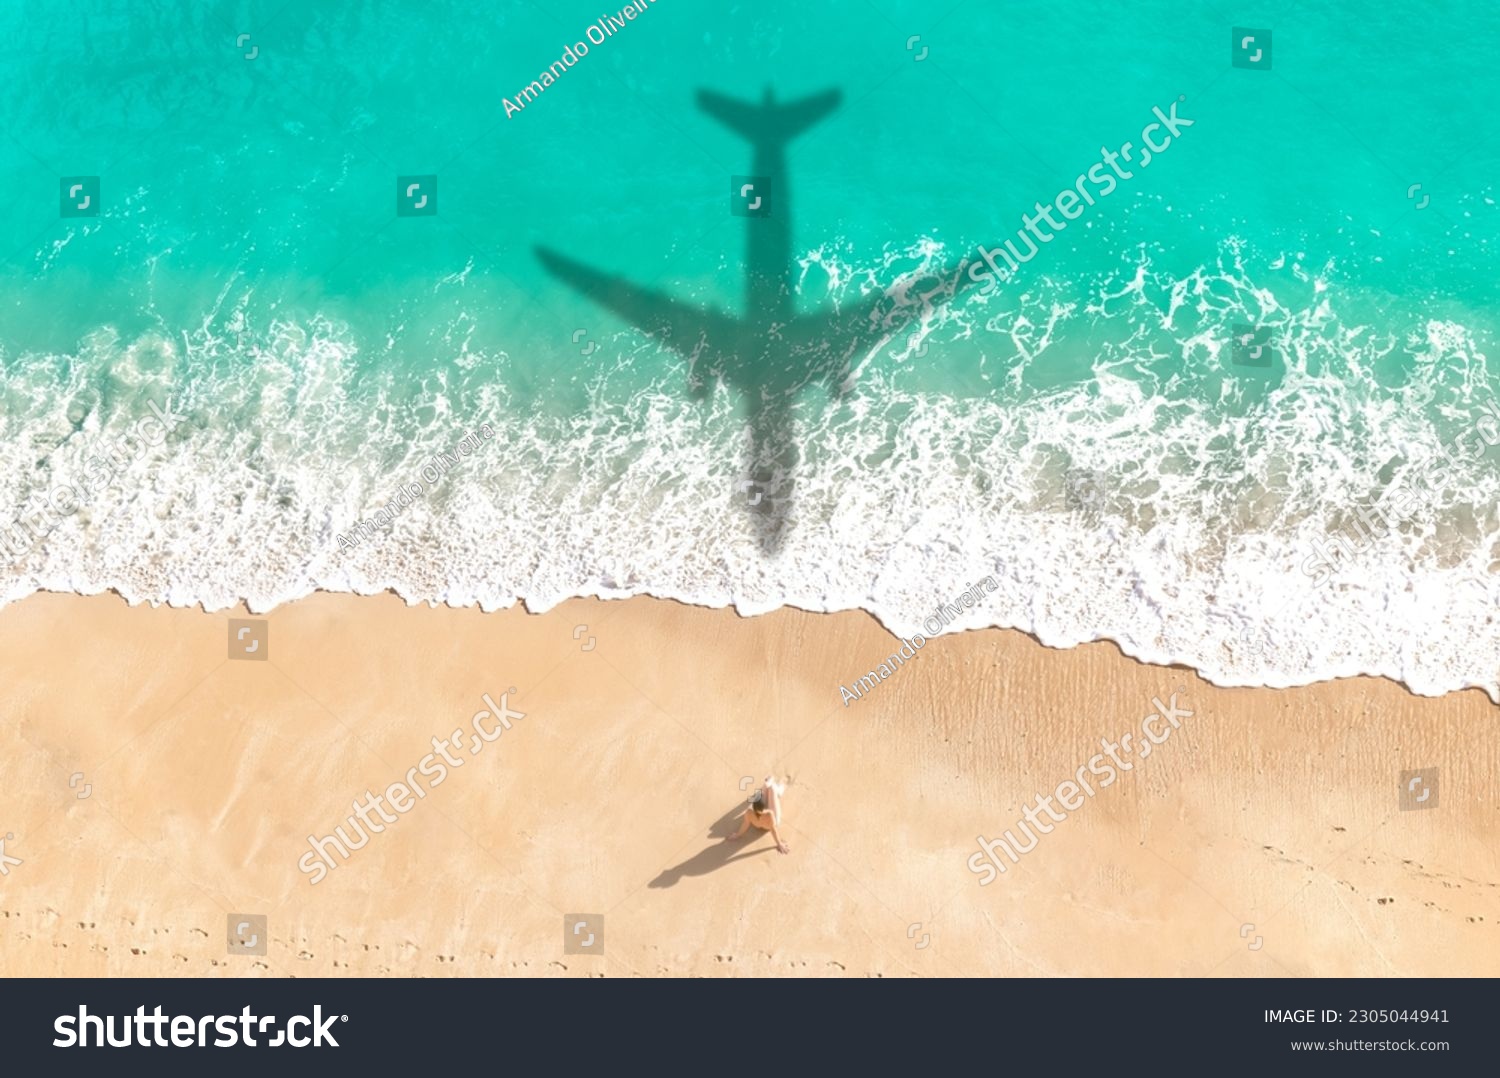 Airplane shadow flying over beautiful exotic tropical beach with woman sunbathing on a sunny cay - Summer vacation travel concept #2305044941